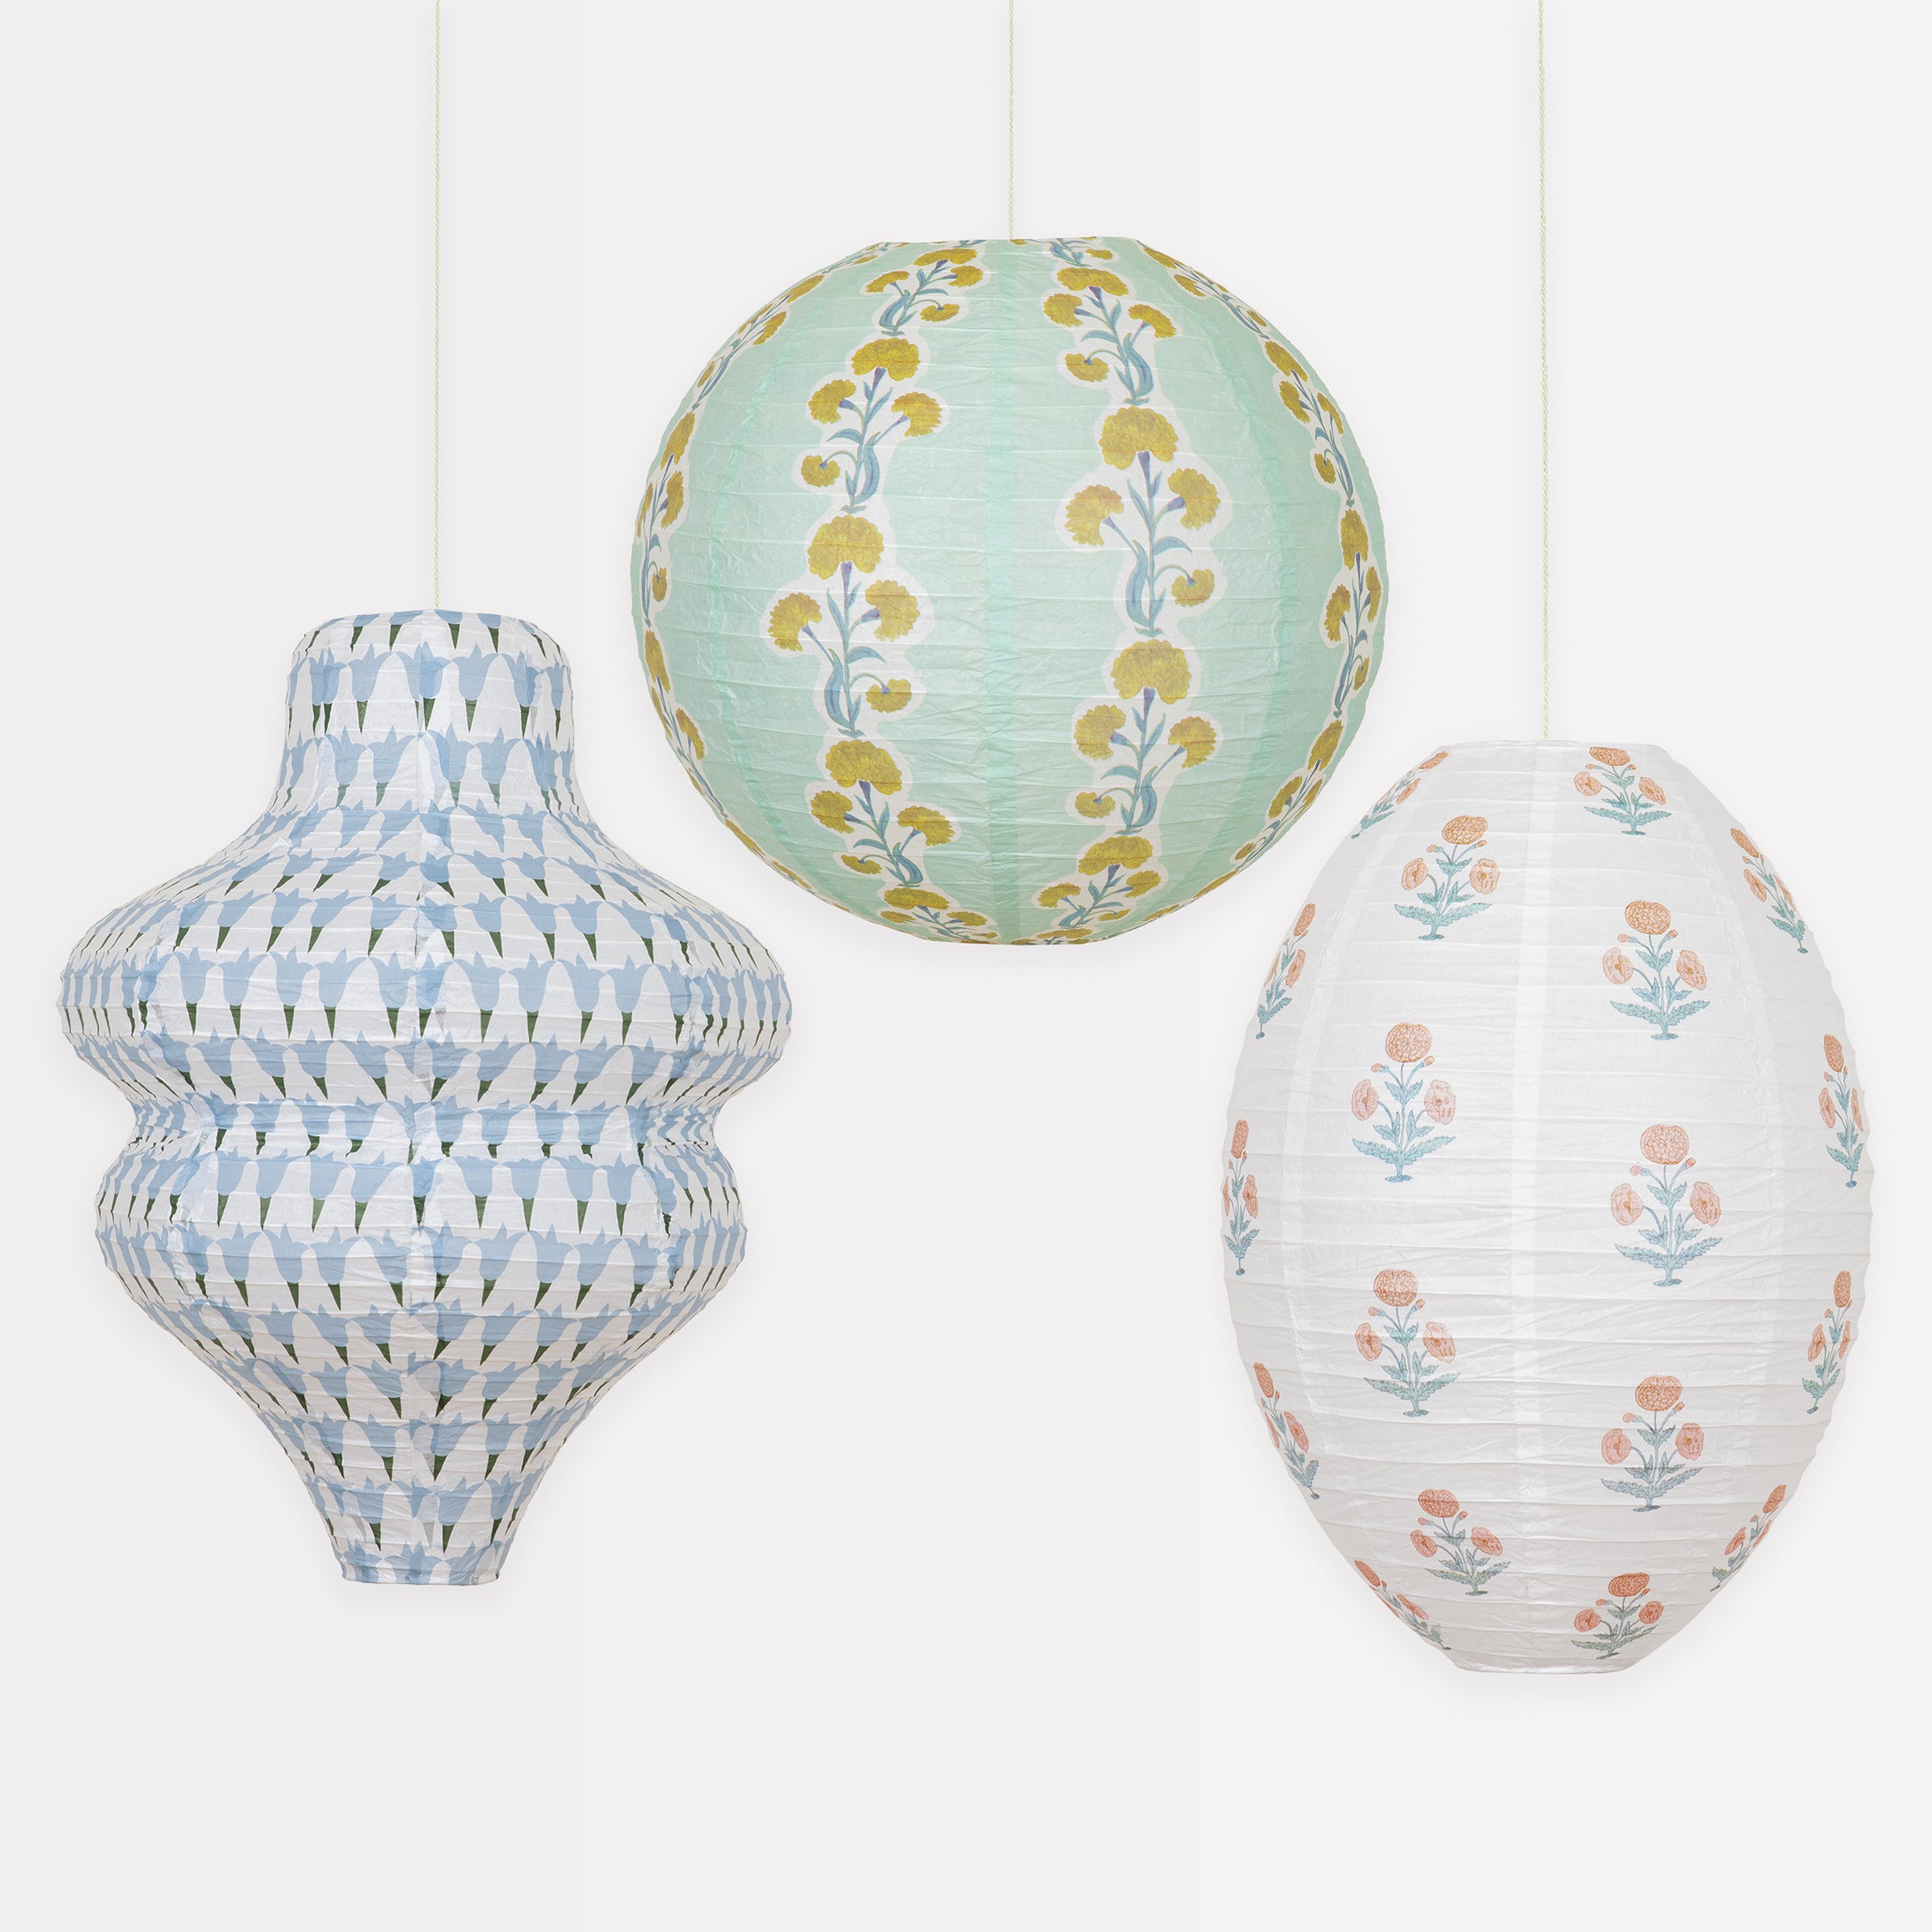 Our fabric lanterns are reusable lanterns and make great hanging decorations.